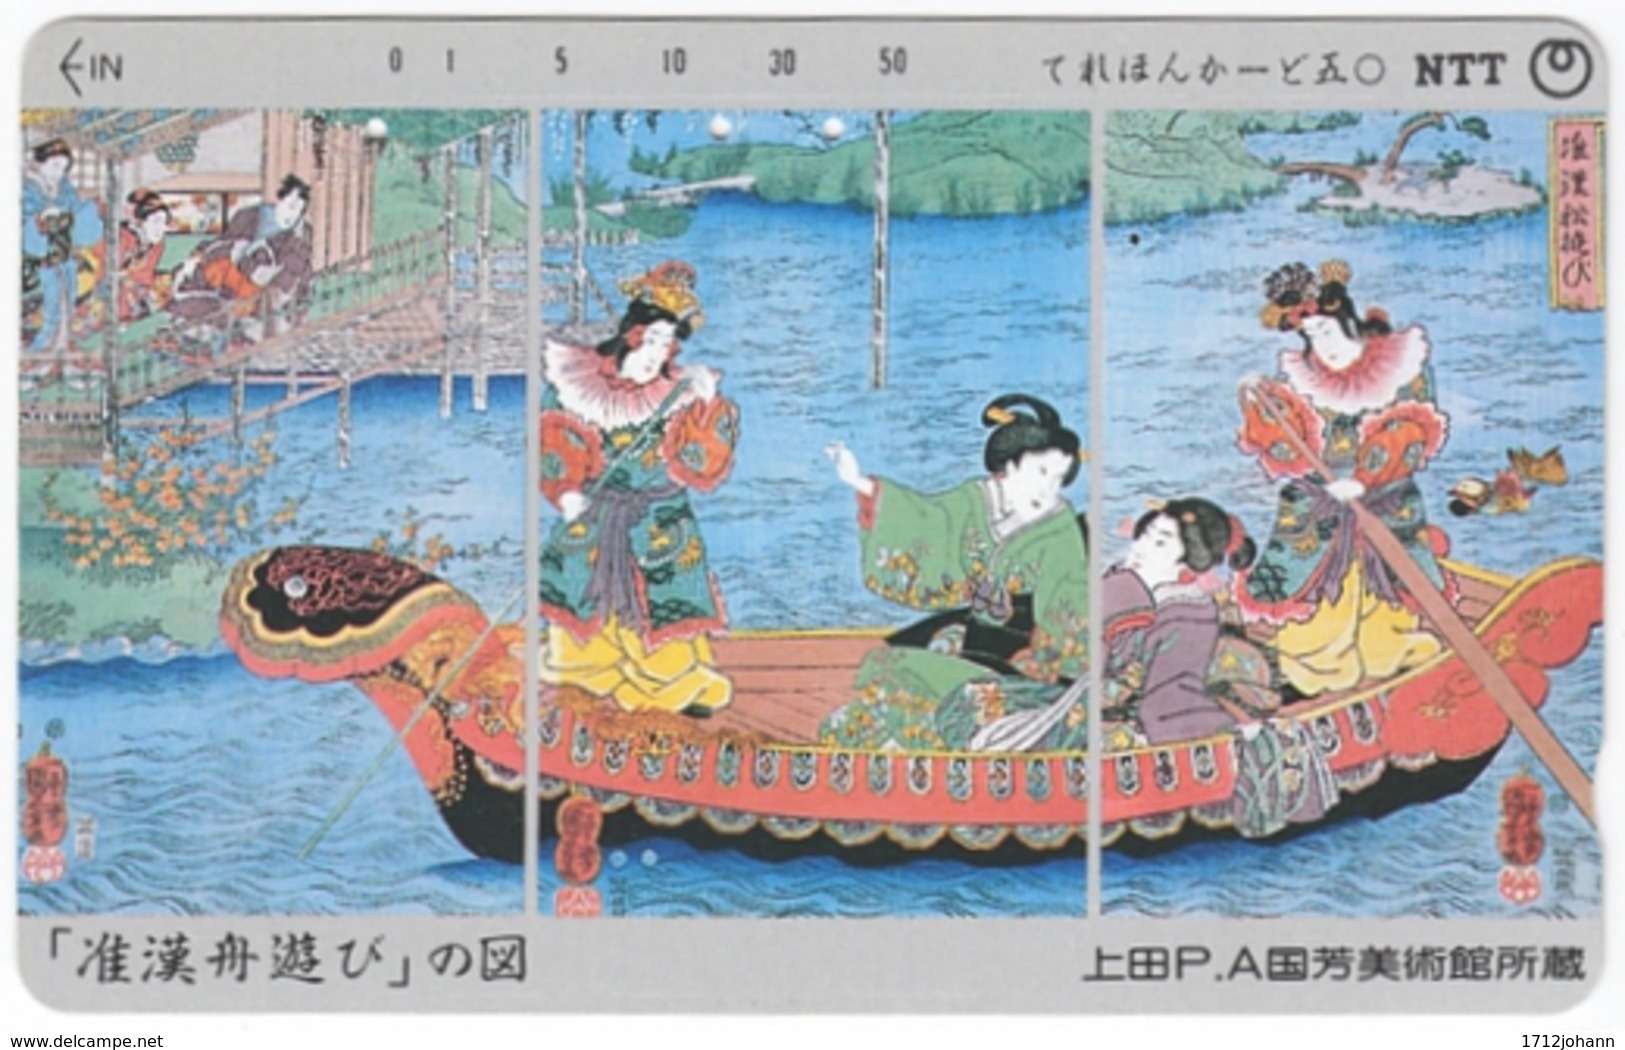 JAPAN L-923 Magnetic NTT [270-156-1989.4.15] - Painting, Traditional Scene - Used - Japan